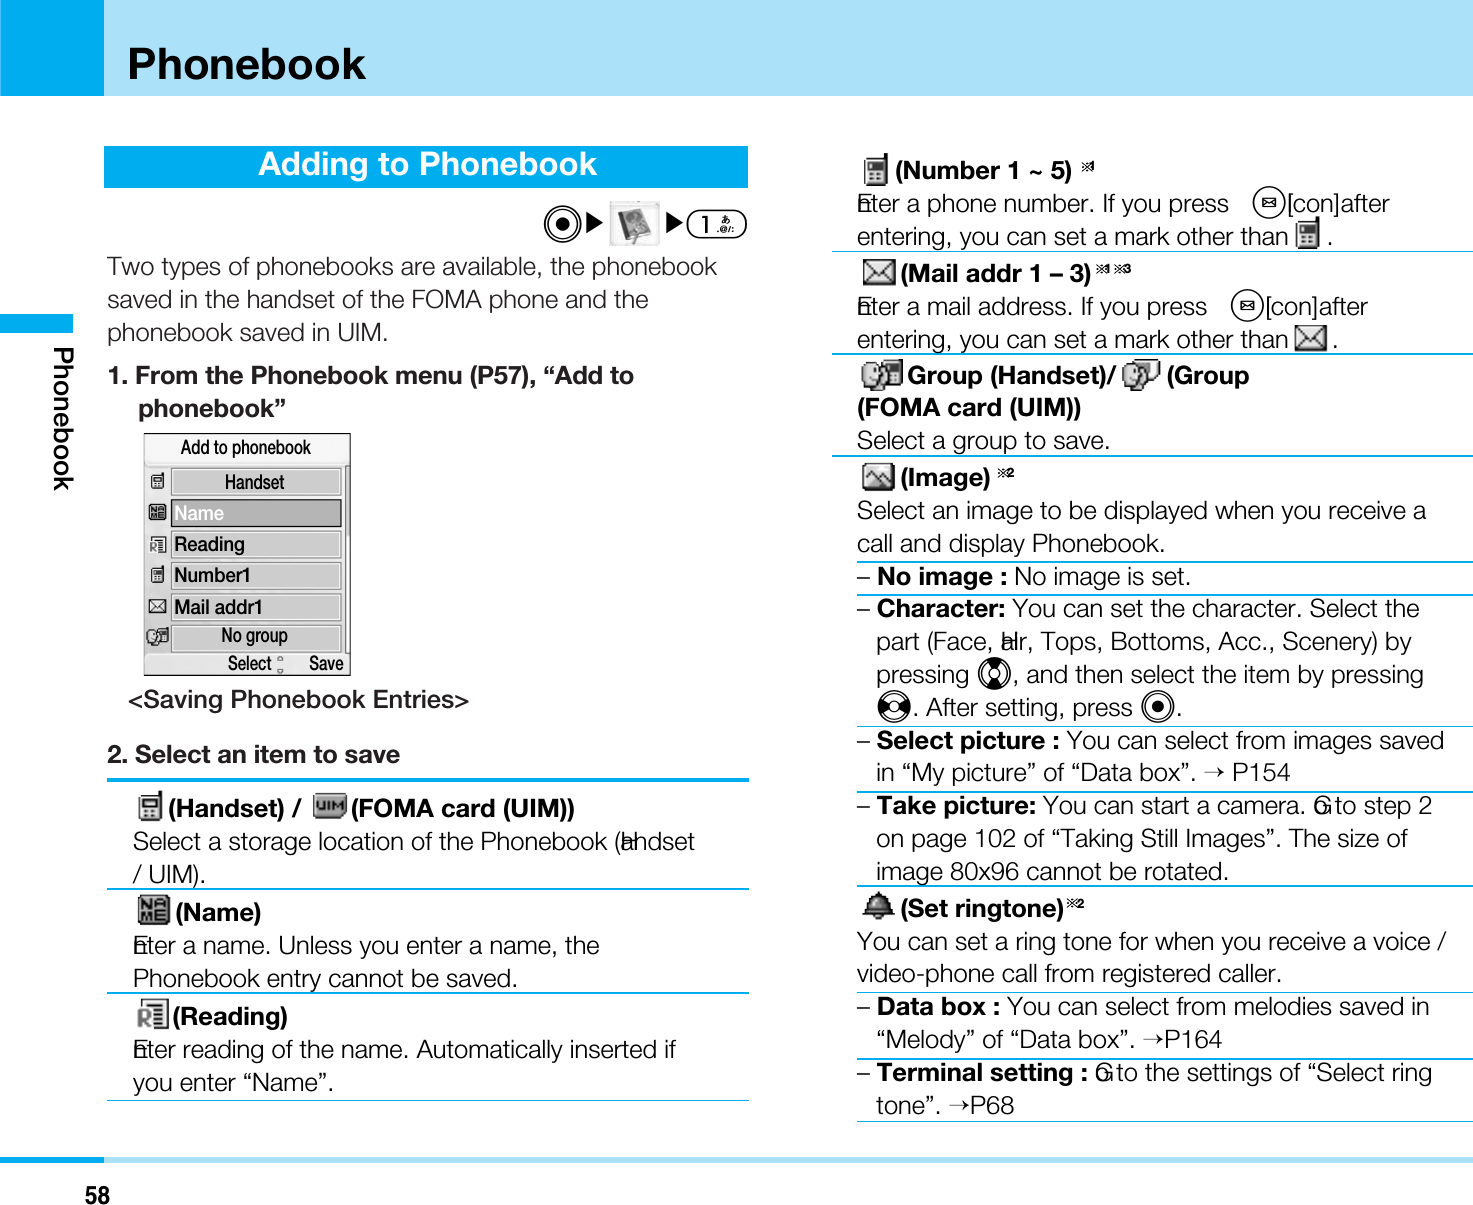 58PhonebookAdding to PhonebookC]]1Two types of phonebooks are available, the phonebooksaved in the handset of the FOMA phone and thephonebook saved in UIM.1. From the Phonebook menu (P57), “Add tophonebook”&lt;Saving Phonebook Entries&gt;2. Select an item to save(Handset) /  (FOMA card (UIM))Select a storage location of the Phonebook (Handset/ UIM).(Name)Enter a name. Unless you enter a name, thePhonebook entry cannot be saved.(Reading)Enter reading of the name. Automatically inserted ifyou enter “Name”.(Number 1 ~ 5) 1Enter a phone number. If you press  M[Icon] afterentering, you can set a mark other than .(Mail addr 1 – 3) 1 3Enter a mail address. If you press  M[Icon] afterentering, you can set a mark other than .Group (Handset)/ (Group(FOMA card (UIM))Select a group to save.(Image) 2Select an image to be displayed when you receive acall and display Phonebook.–No image : No image is set.–Character: You can set the character. Select thepart (Face, Hair, Tops, Bottoms, Acc., Scenery) bypressing H, and then select the item by pressingJ. After setting, press C.–Select picture : You can select from images savedin “My picture” of “Data box”. &gt;P154–Take picture: You can start a camera. Go to step 2on page 102 of “Taking Still Images”. The size ofimage 80x96 cannot be rotated.(Set ringtone) 2You can set a ring tone for when you receive a voice /video-phone call from registered caller.–Data box : You can select from melodies saved in“Melody” of “Data box”. &gt;P164–Terminal setting : Go to the settings of “Select ringtone”. &gt;P68HandsetNo groupNameReadingNumber1Mail addr1Add to phonebookSelect         SavePhonebook